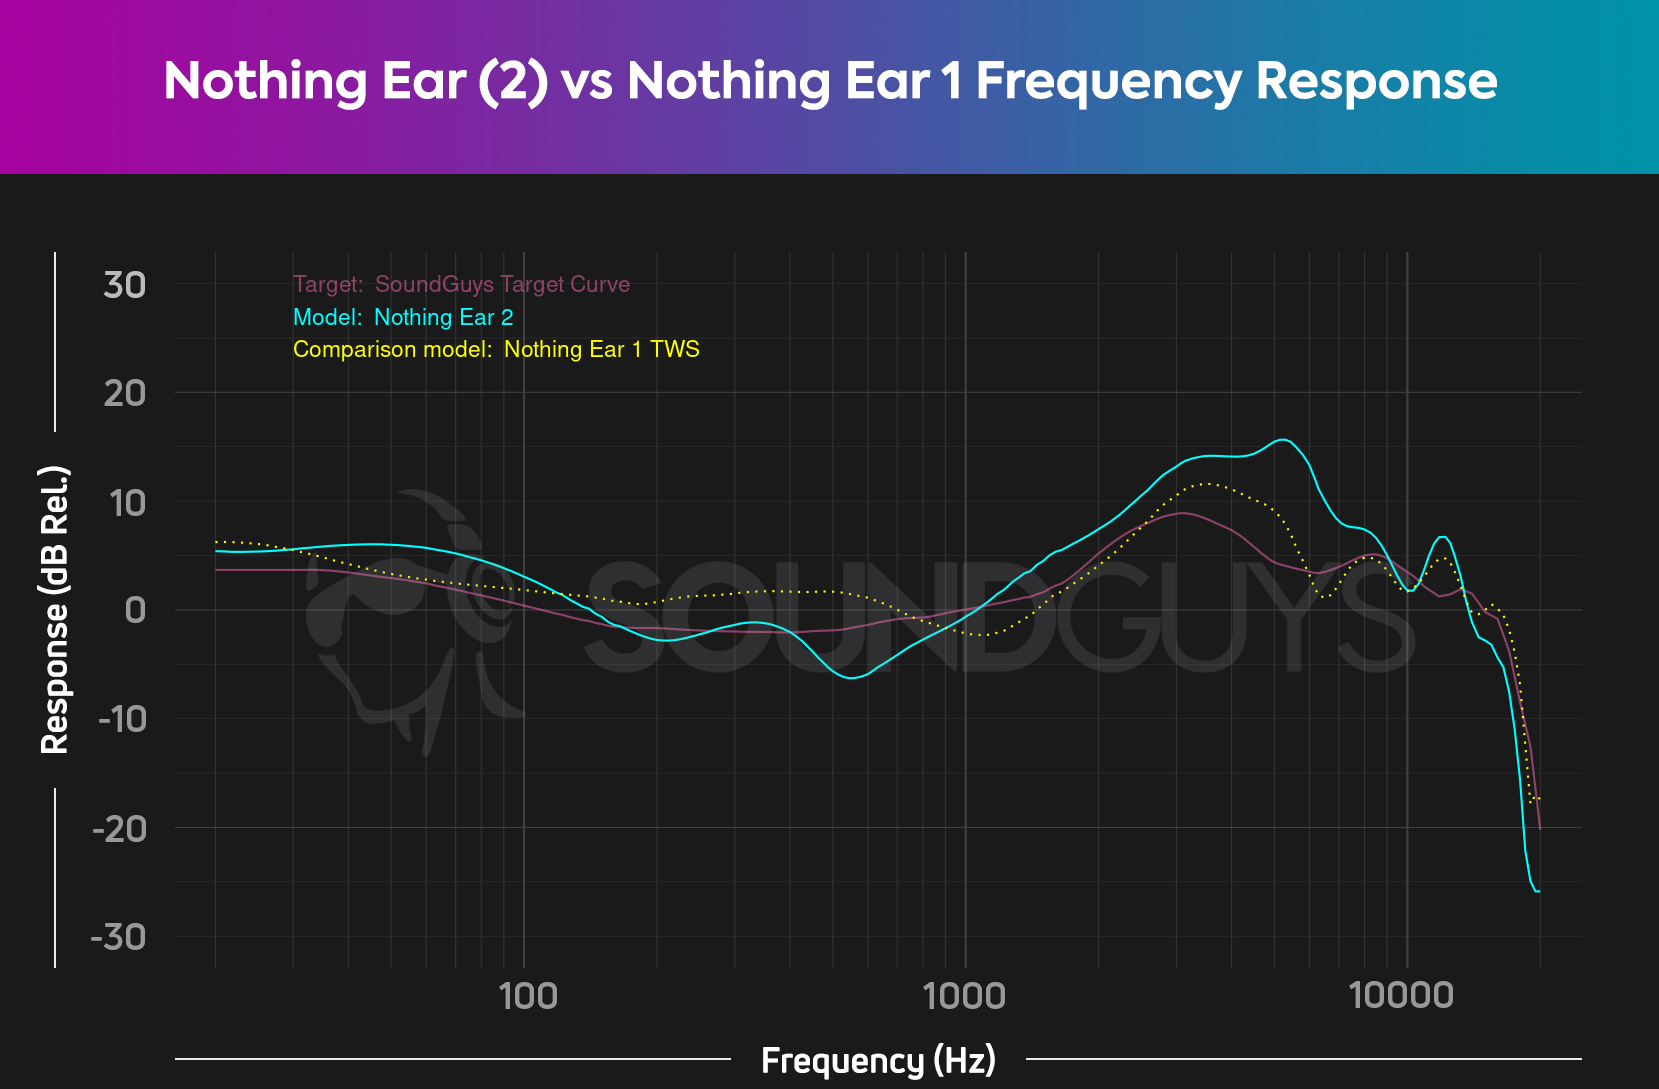 A chart shows the Nothing Ear (2) and the Nothing Ear 1 frequency responses compared to the target curve.